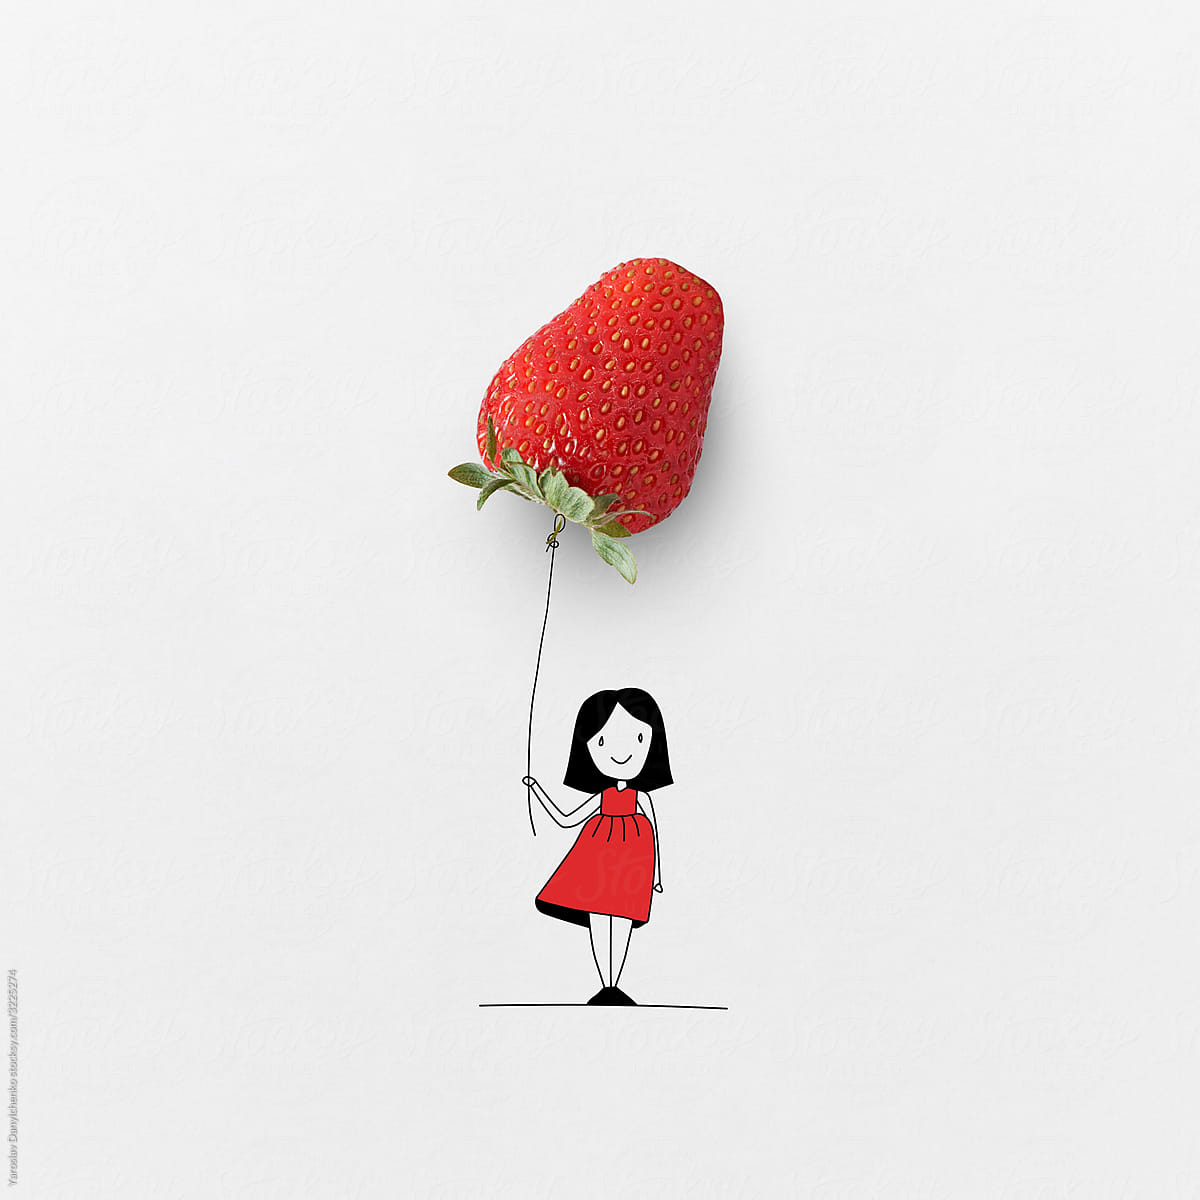 Girl with natural strawberry balloon.